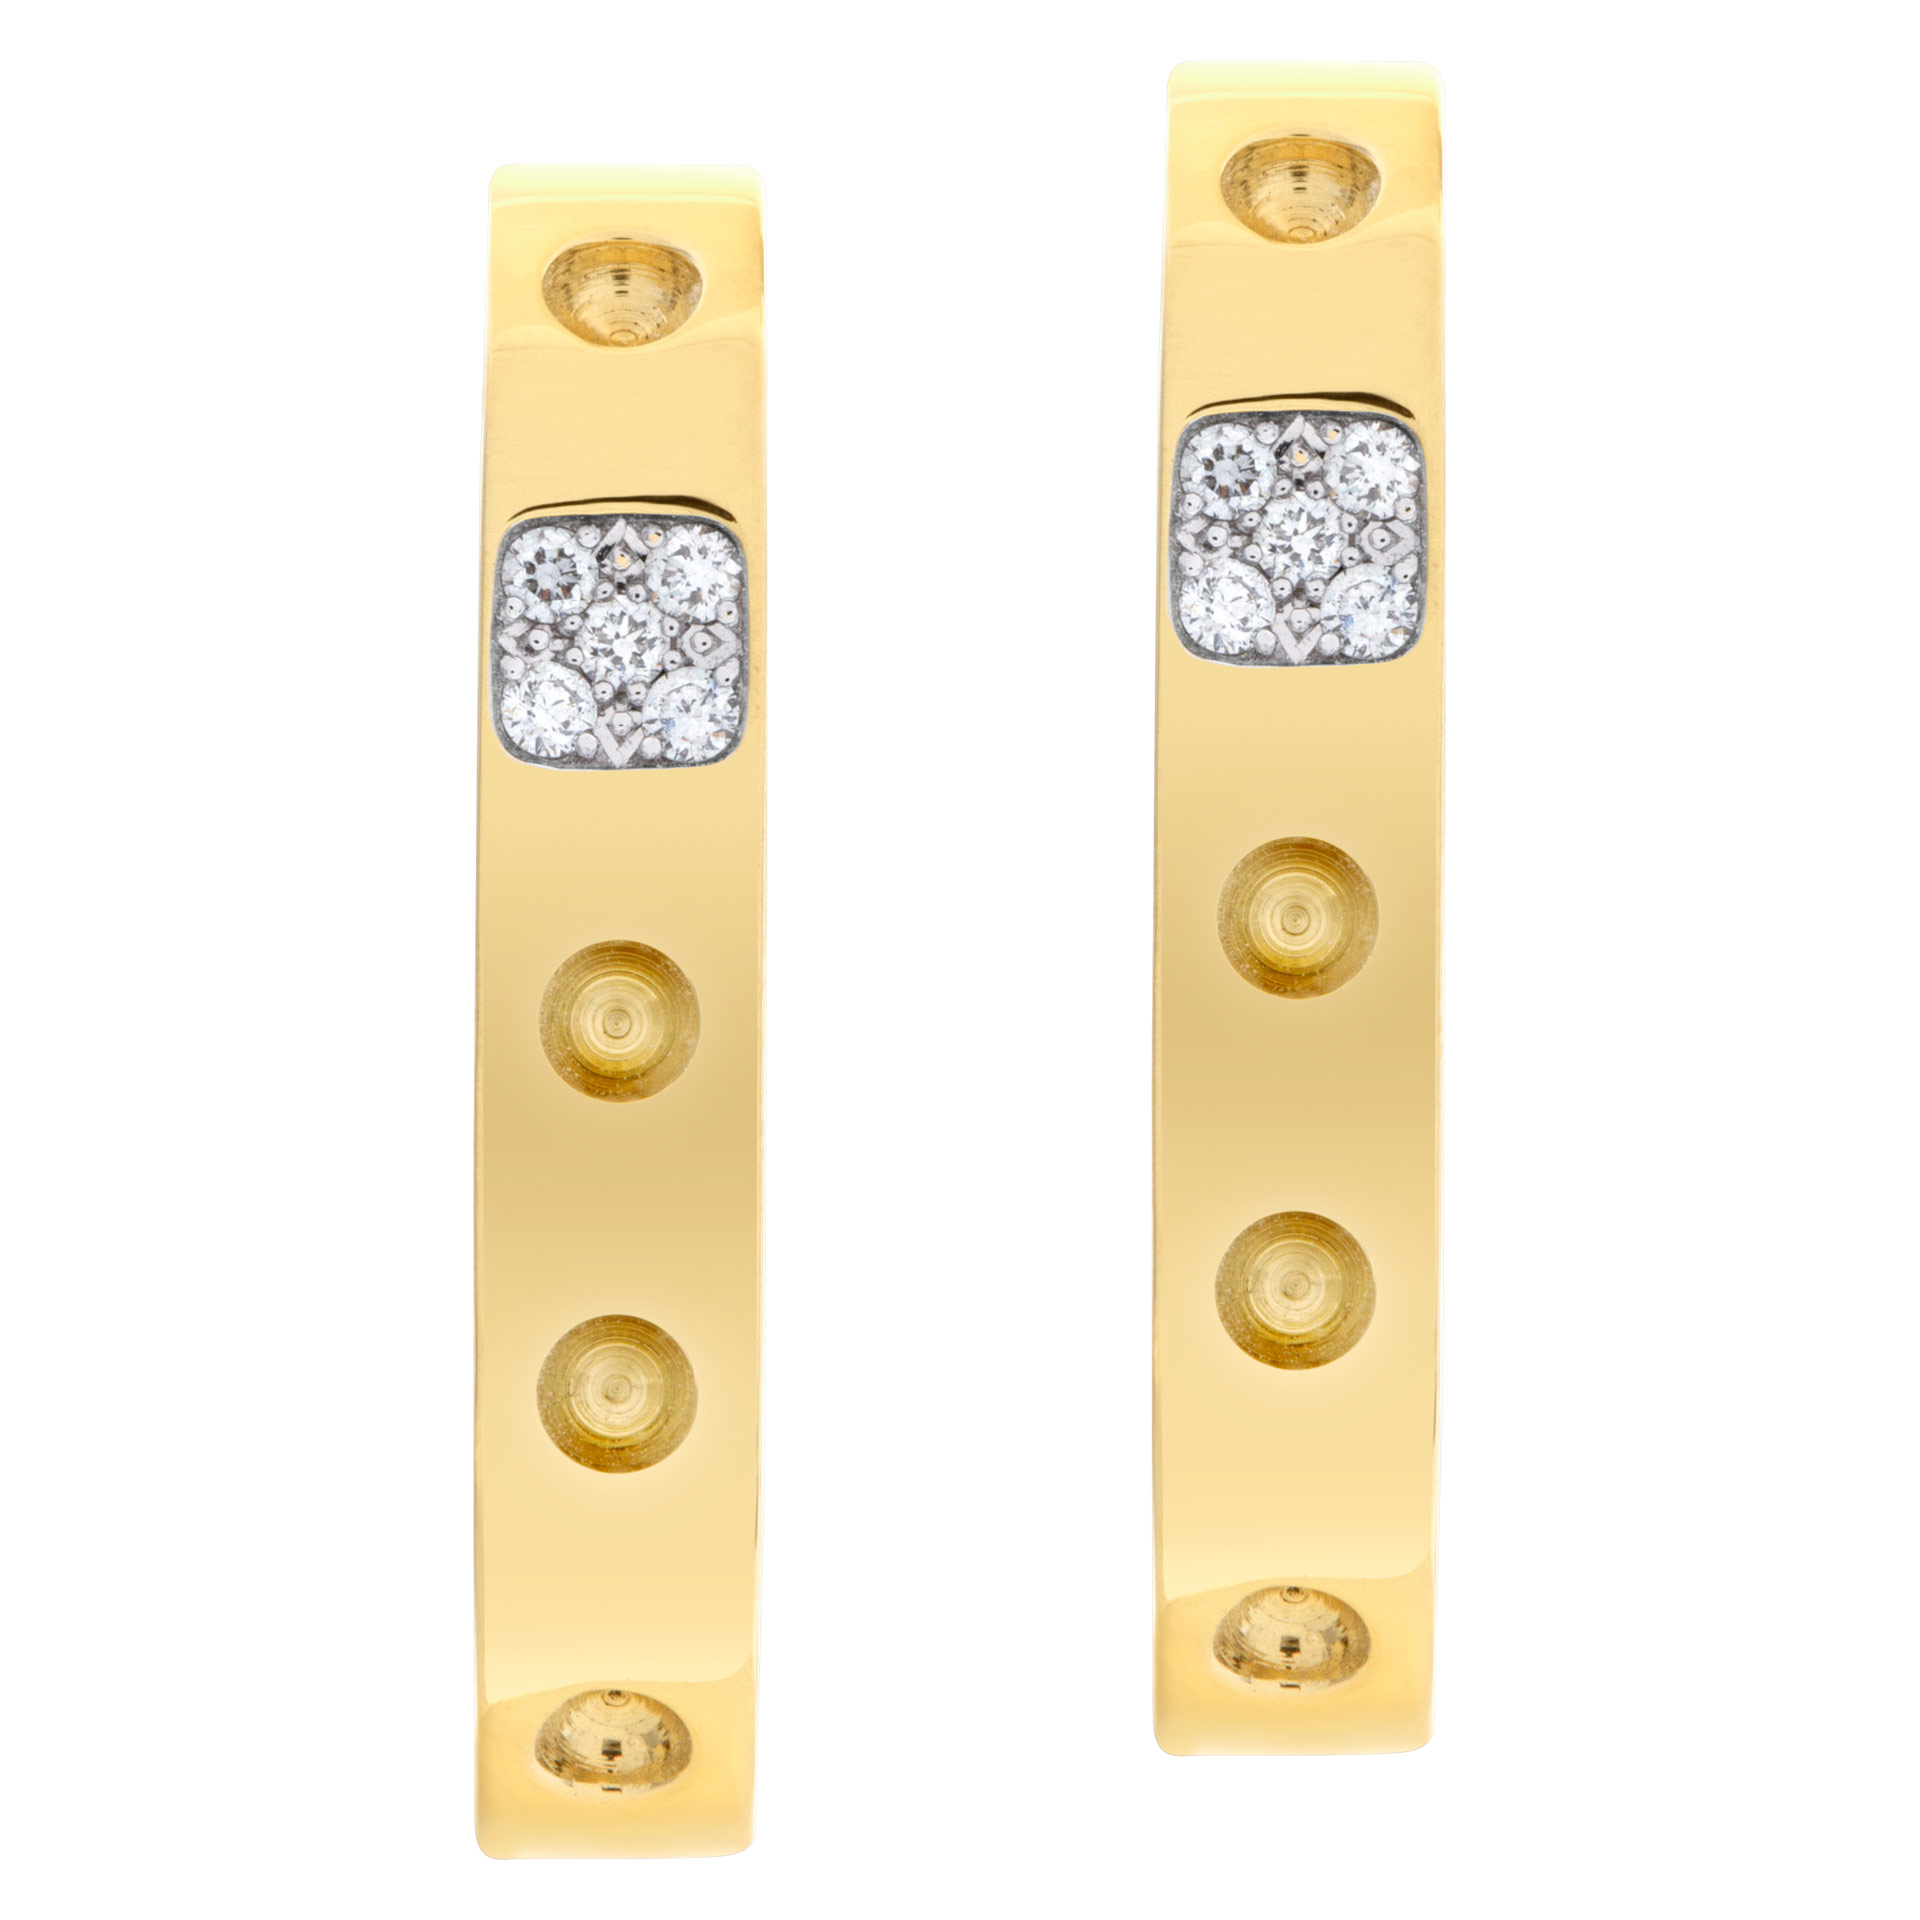 Roberto Coin Pois Moi earrings in 18k with diamonds